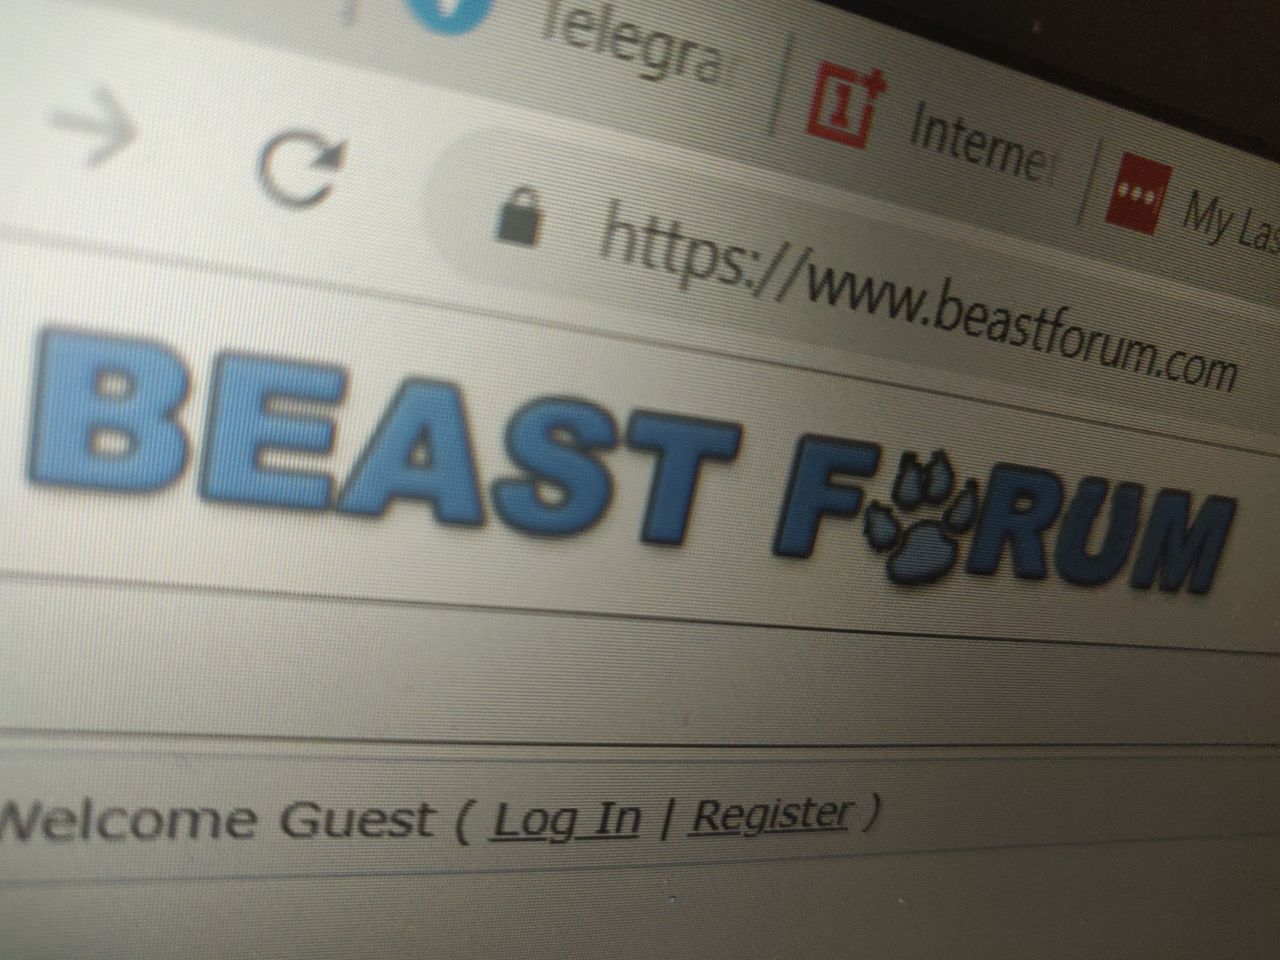 BeastForum, world’s premier bestiality website, is shutting down (Gaybeast and other associated sites too)